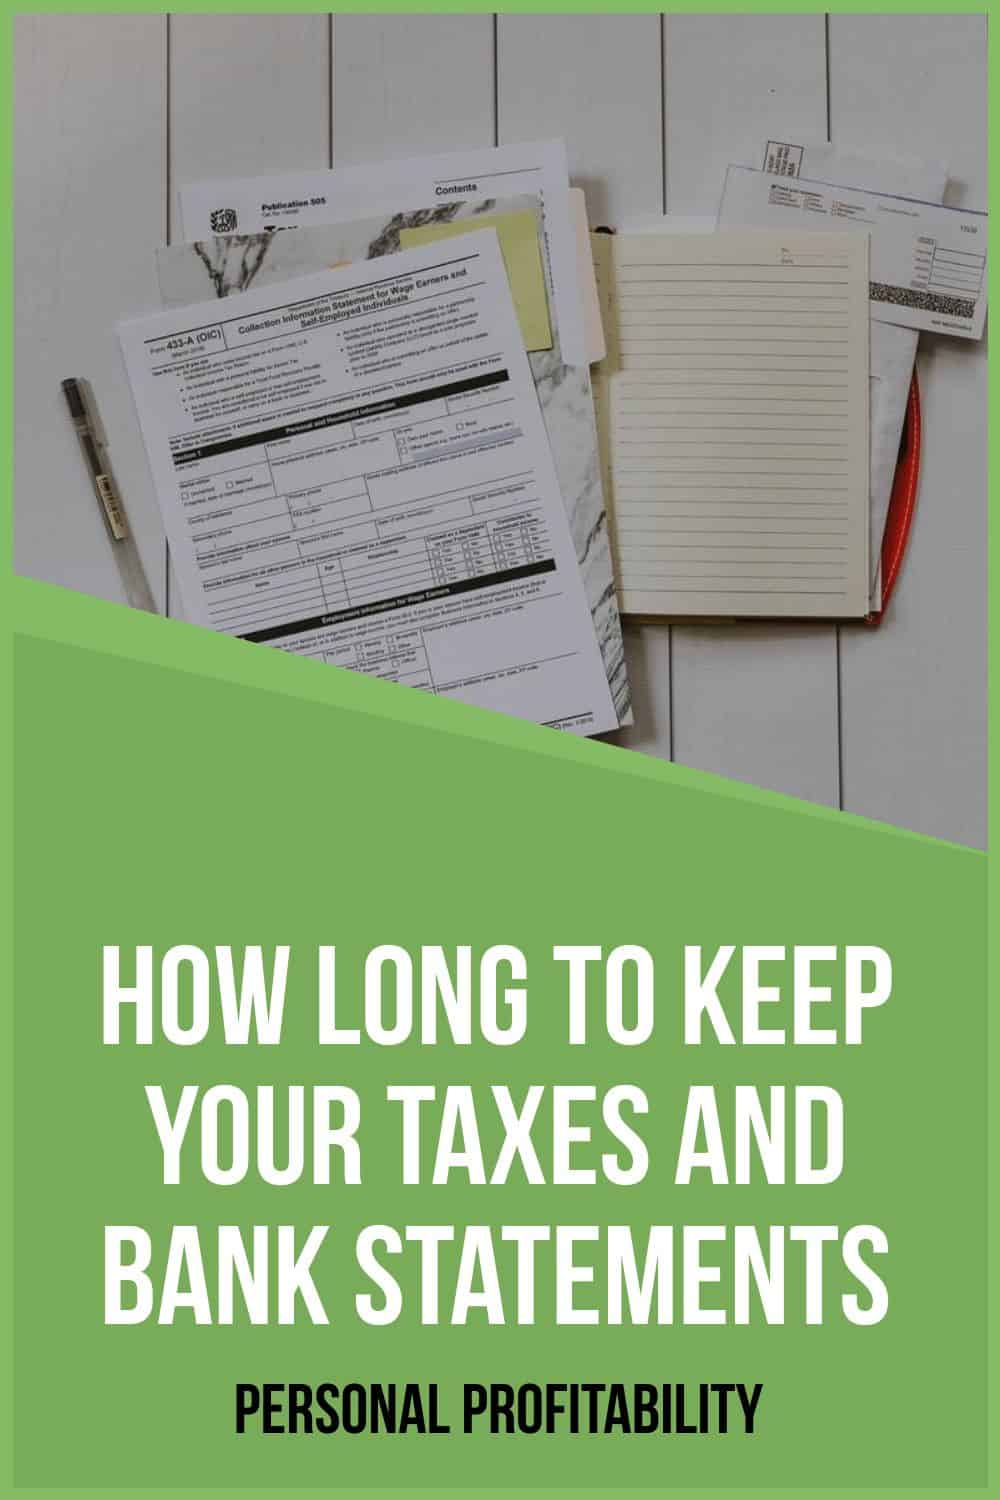 How Long to Keep Your Taxes and Bank Statements